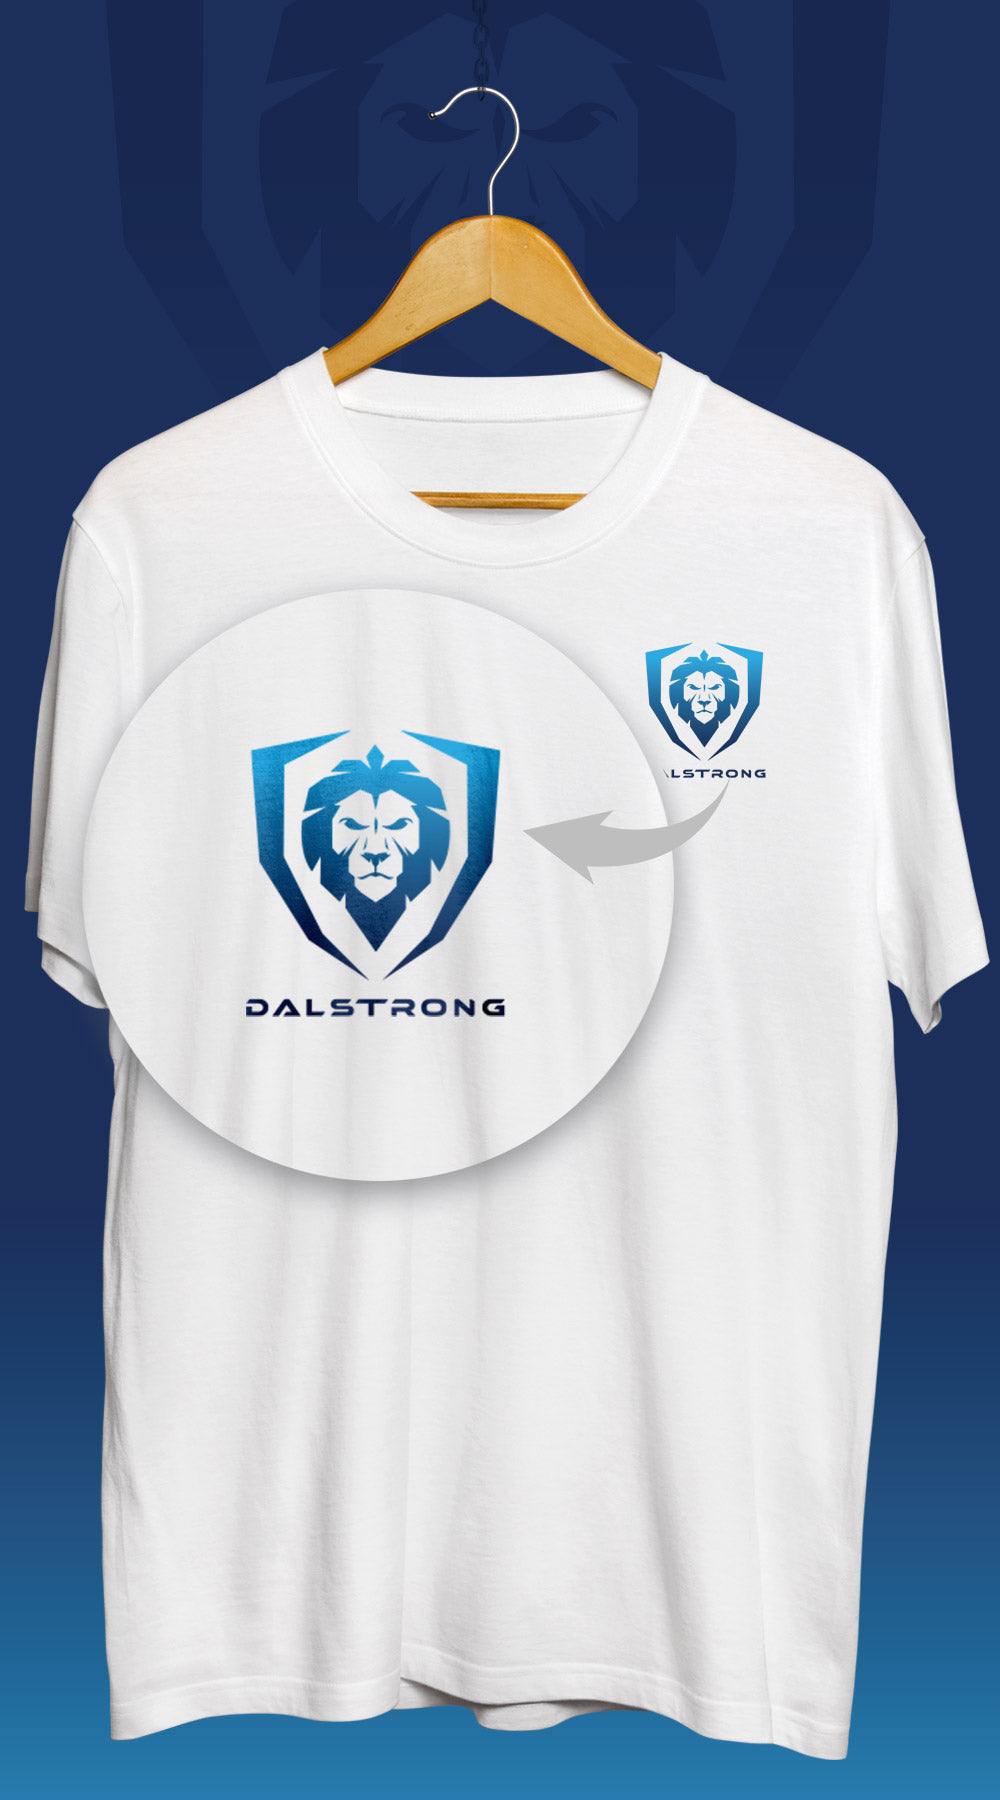 Dalstrong ruler of them all tee white front design with logo and dalstrong name.